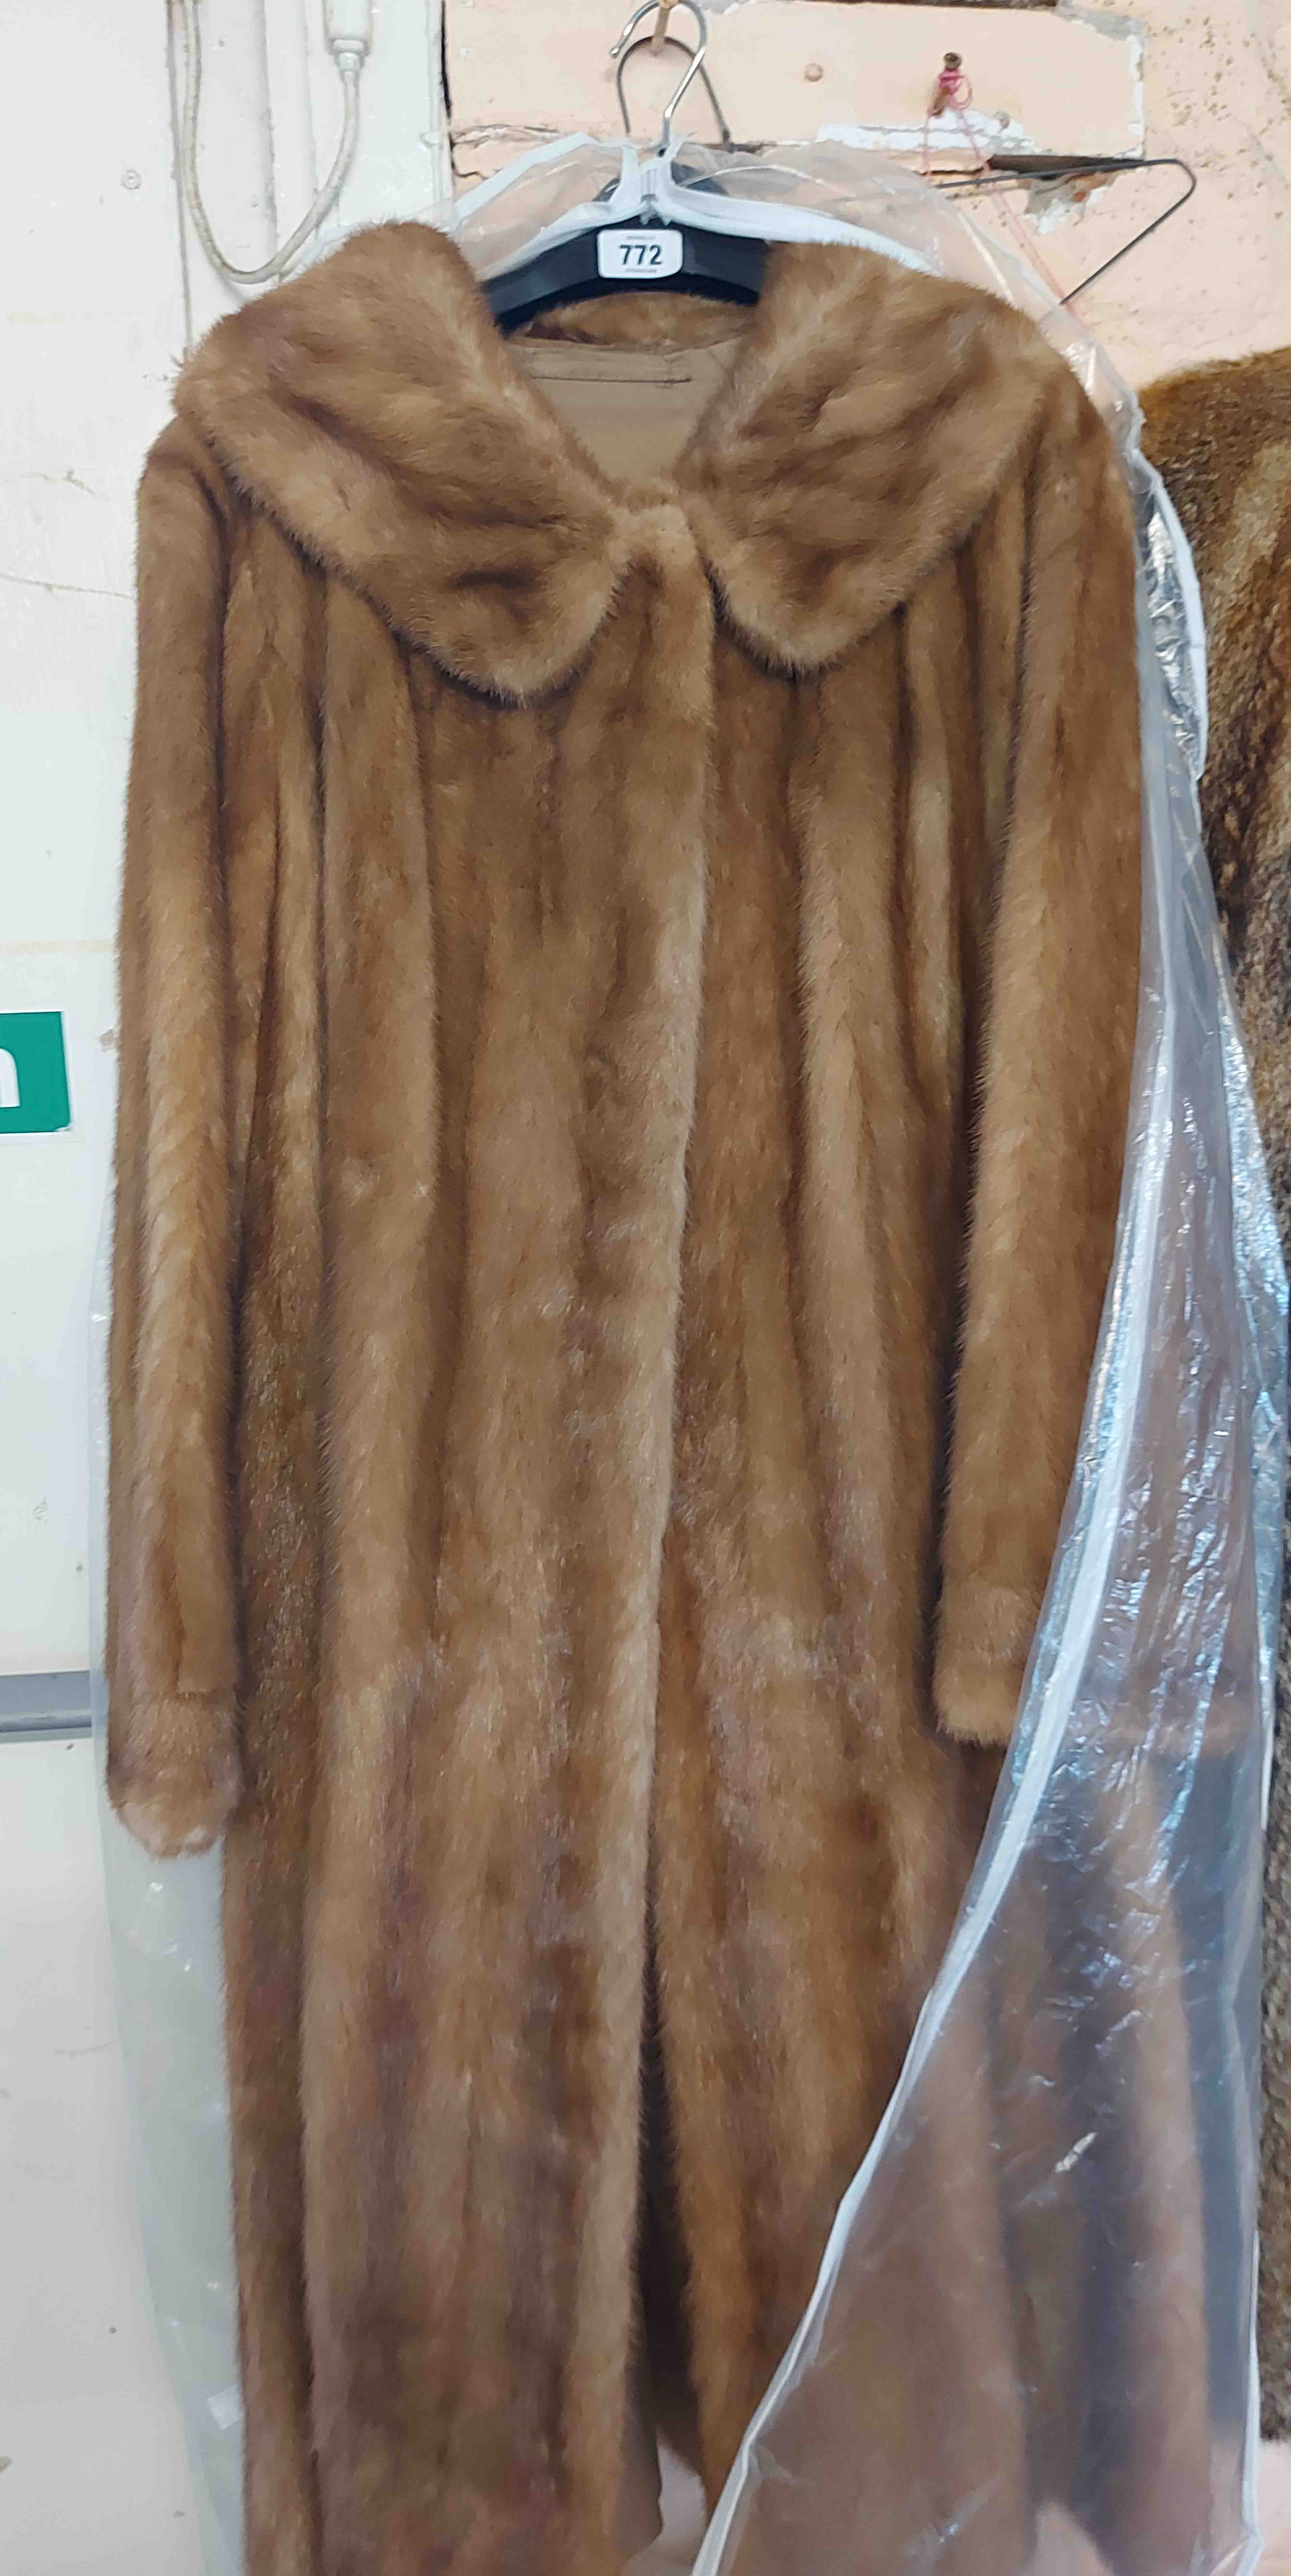 An old fur coat and hat